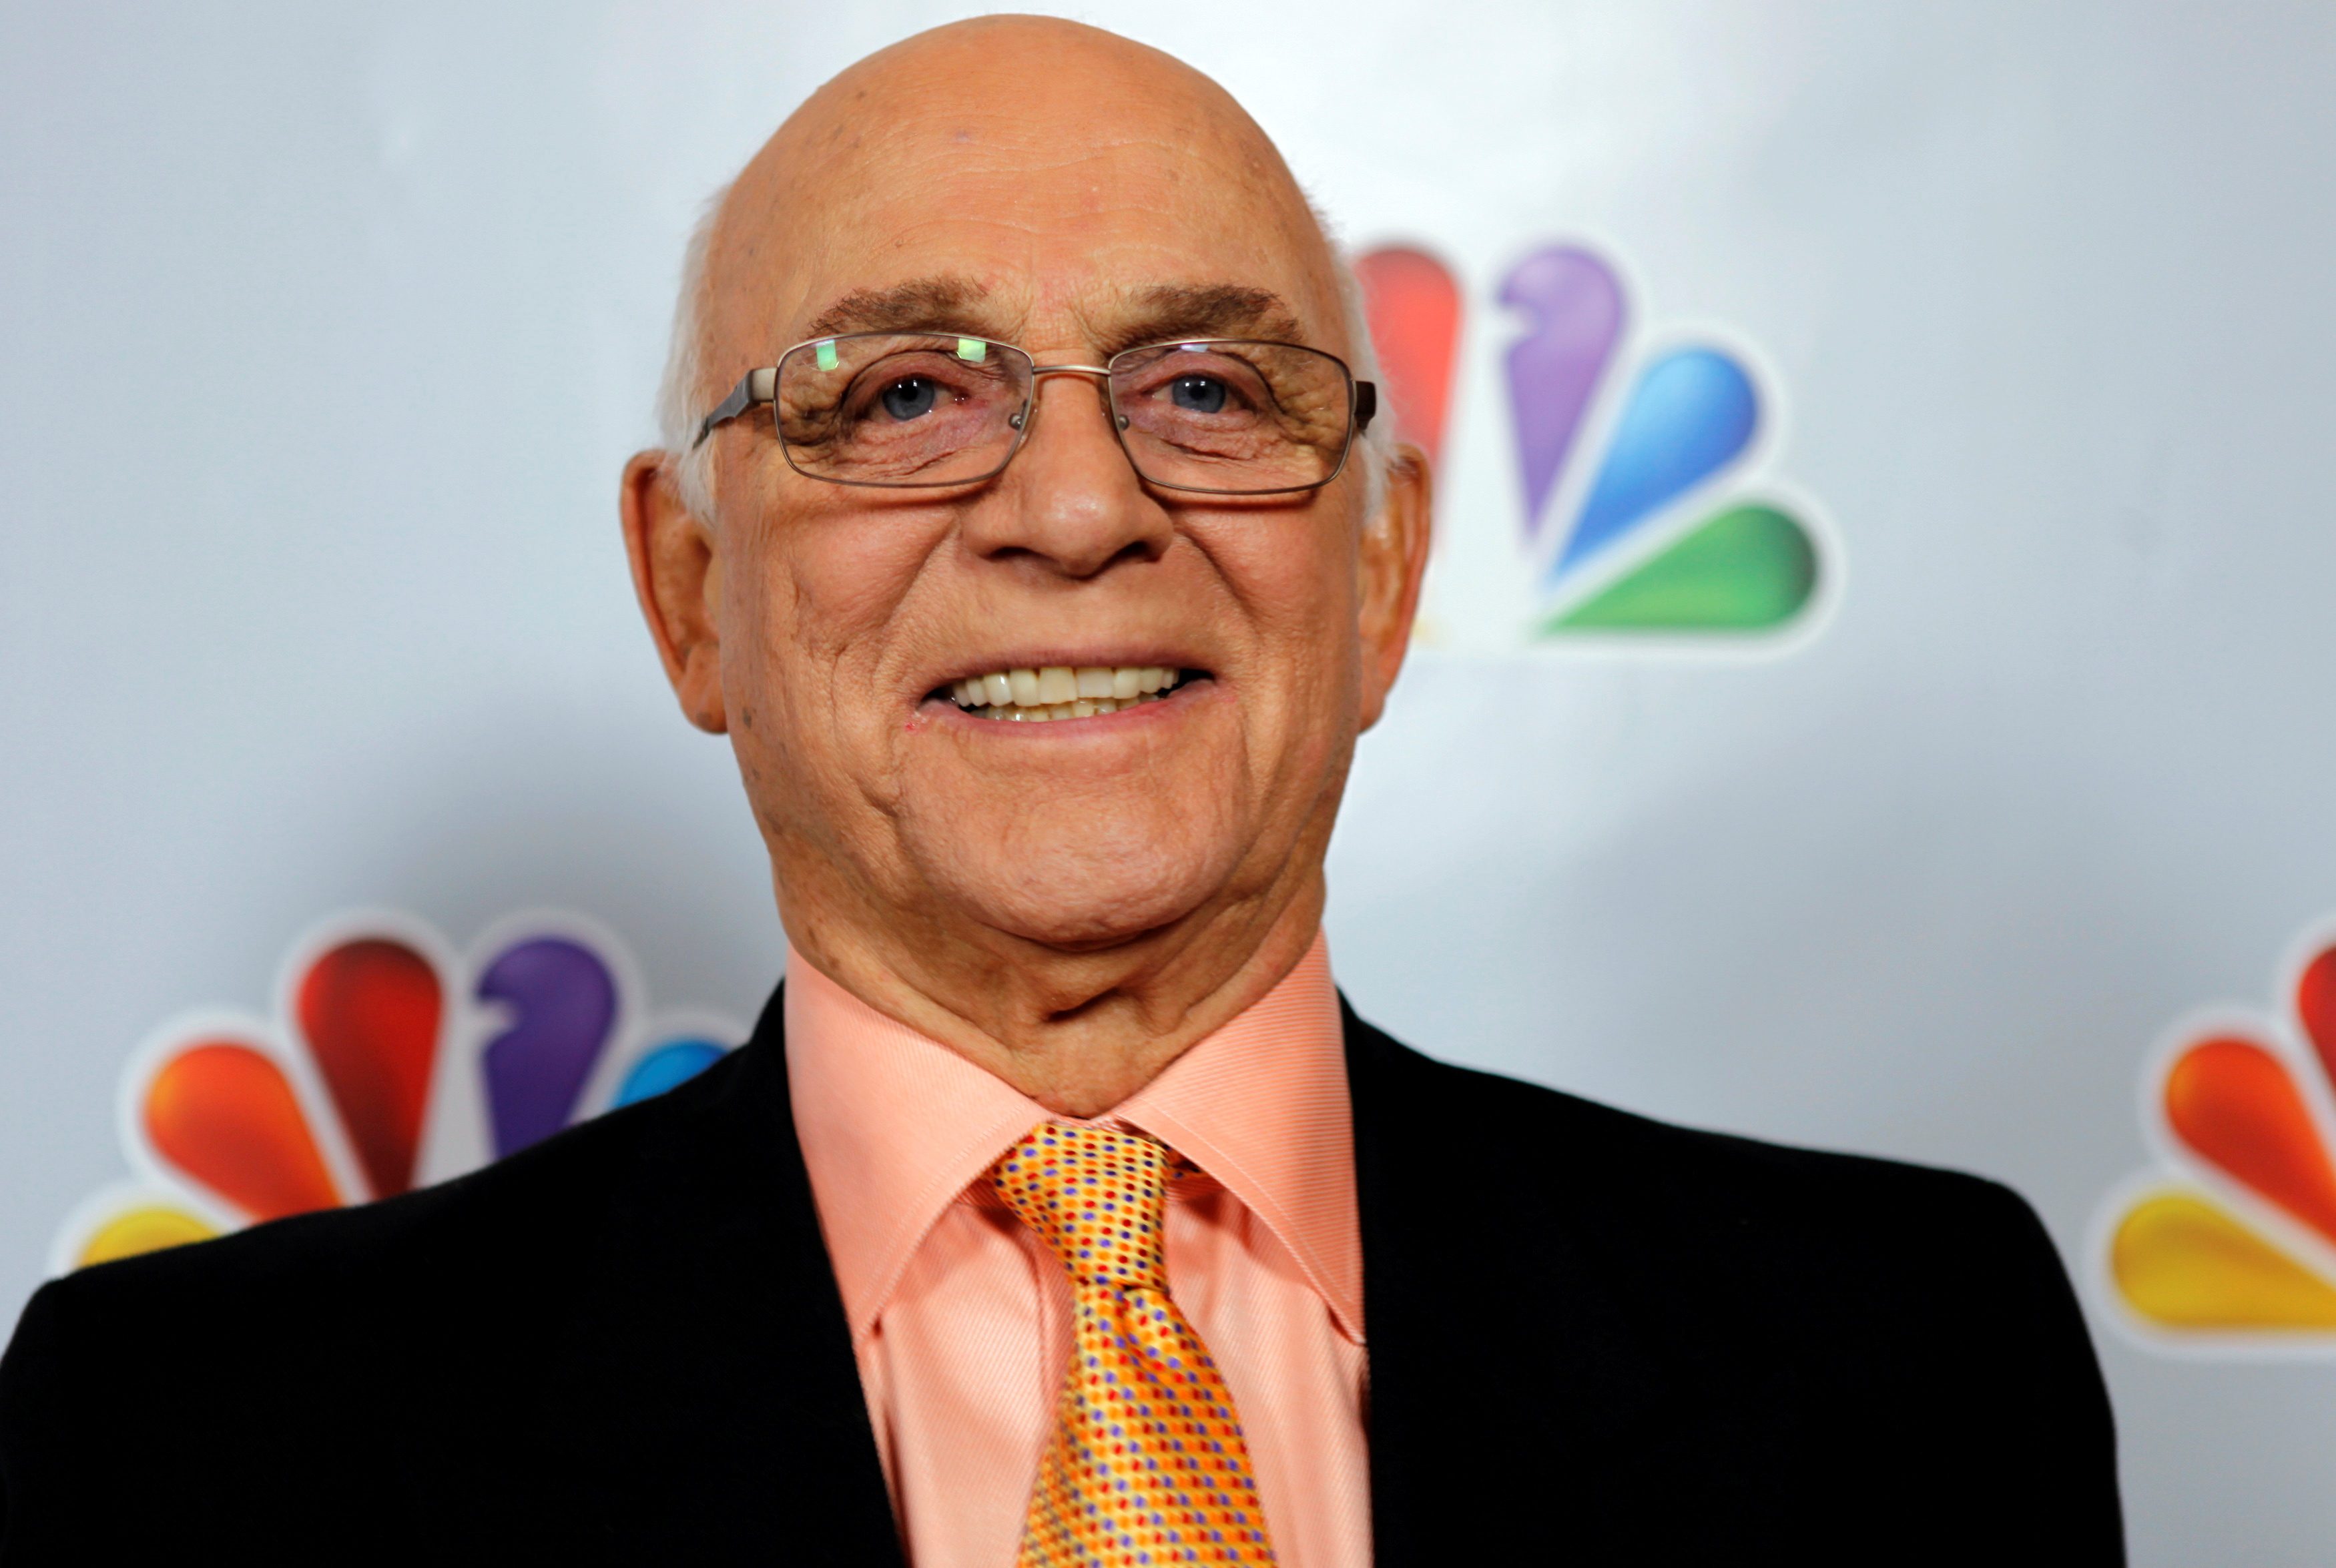 Gavin MacLeod, star of ‘Love Boat’ and ‘Mary Tyler Moore,’ dies at 90